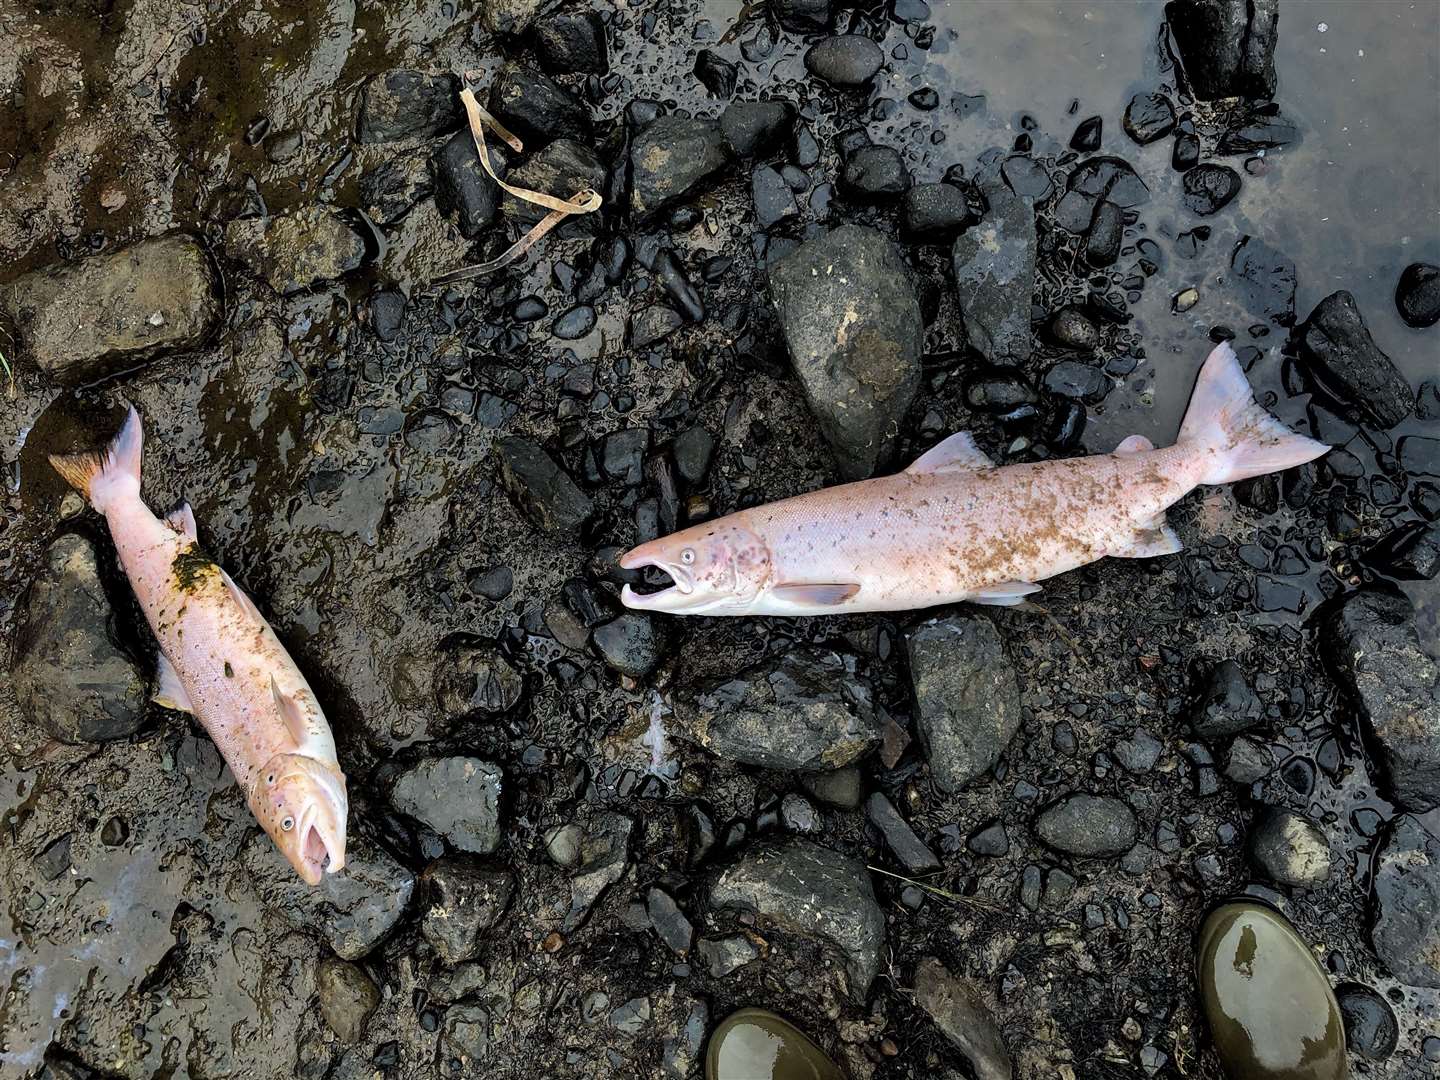 SEPA officers are working with local partners to determine what caused the fish to die and say current evidence suggests the water poses no risk to the public.